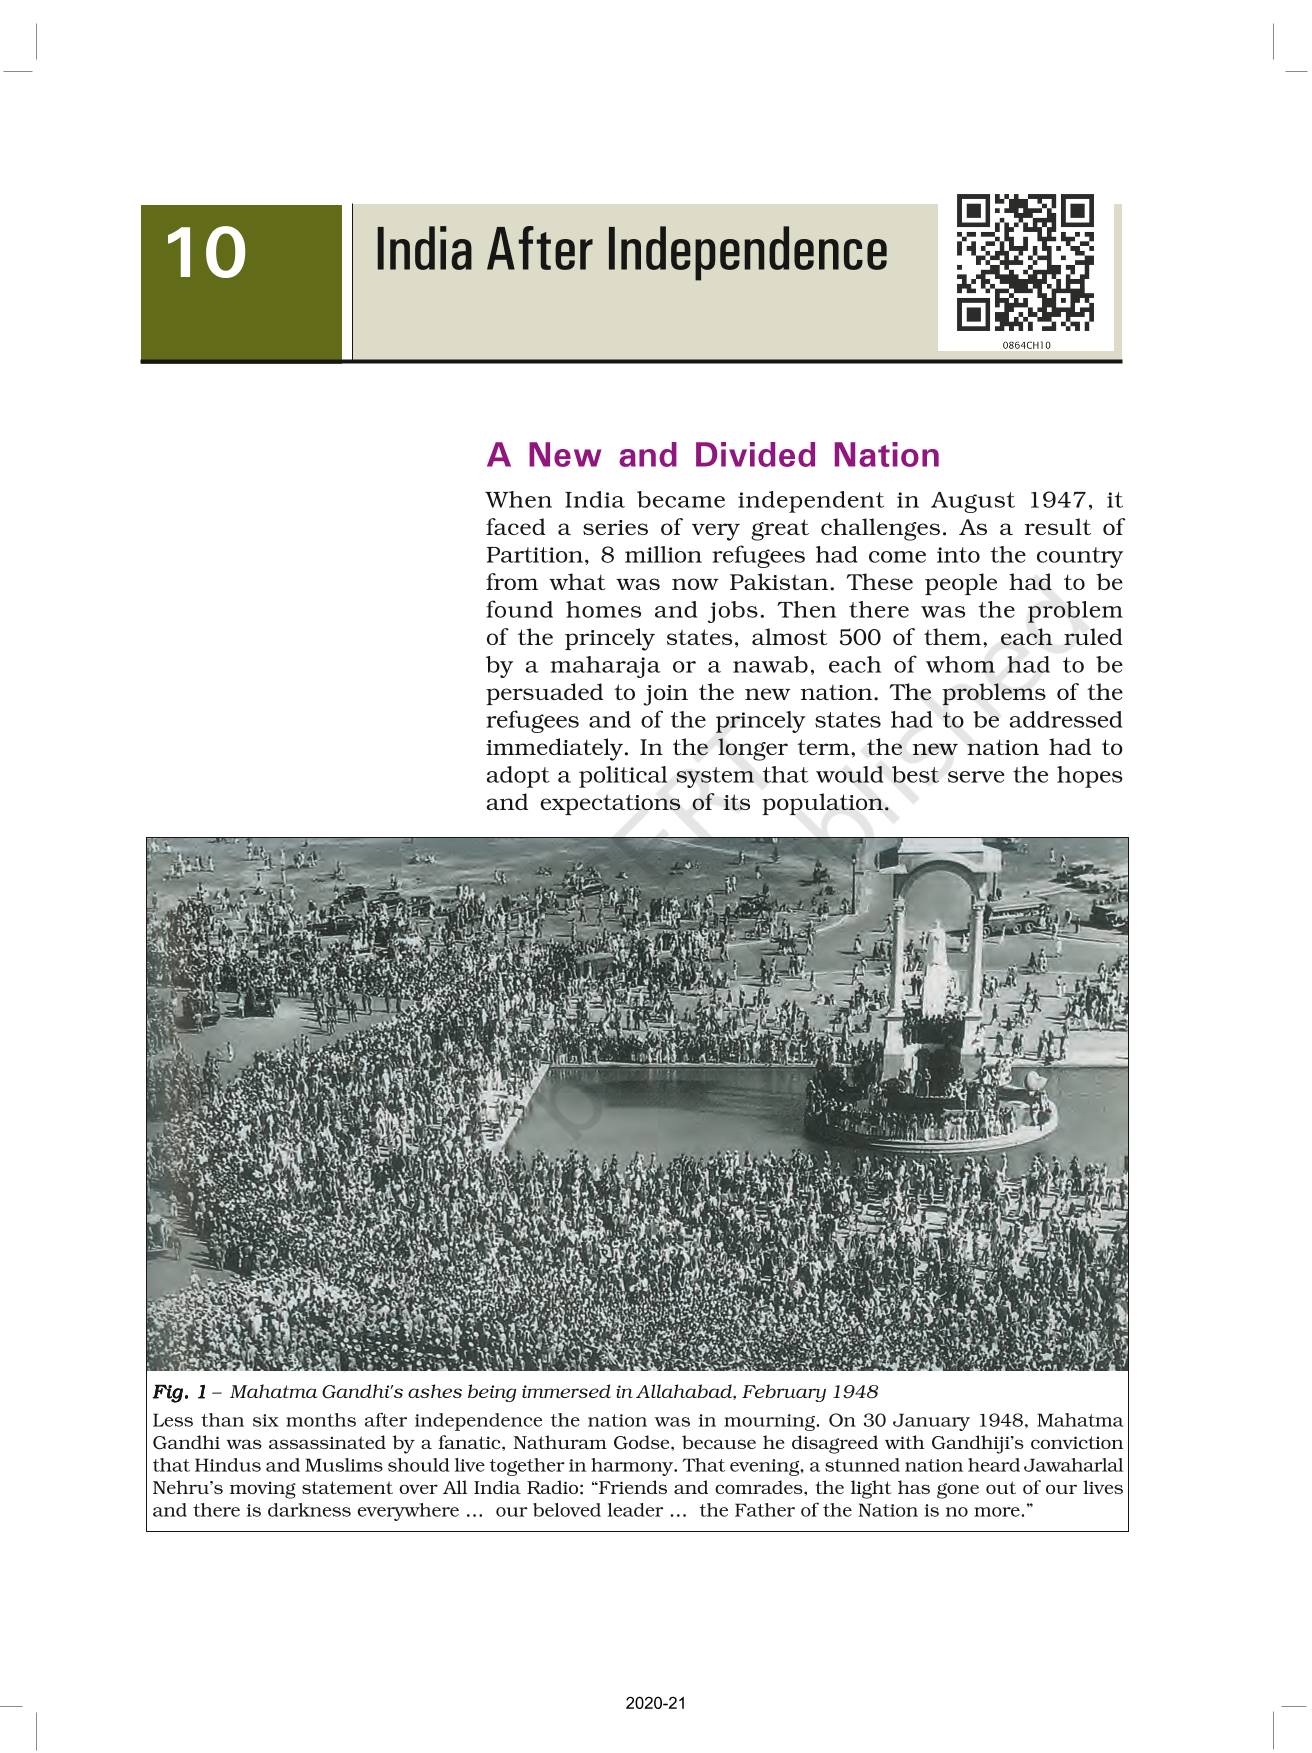 india after independence essay class 8